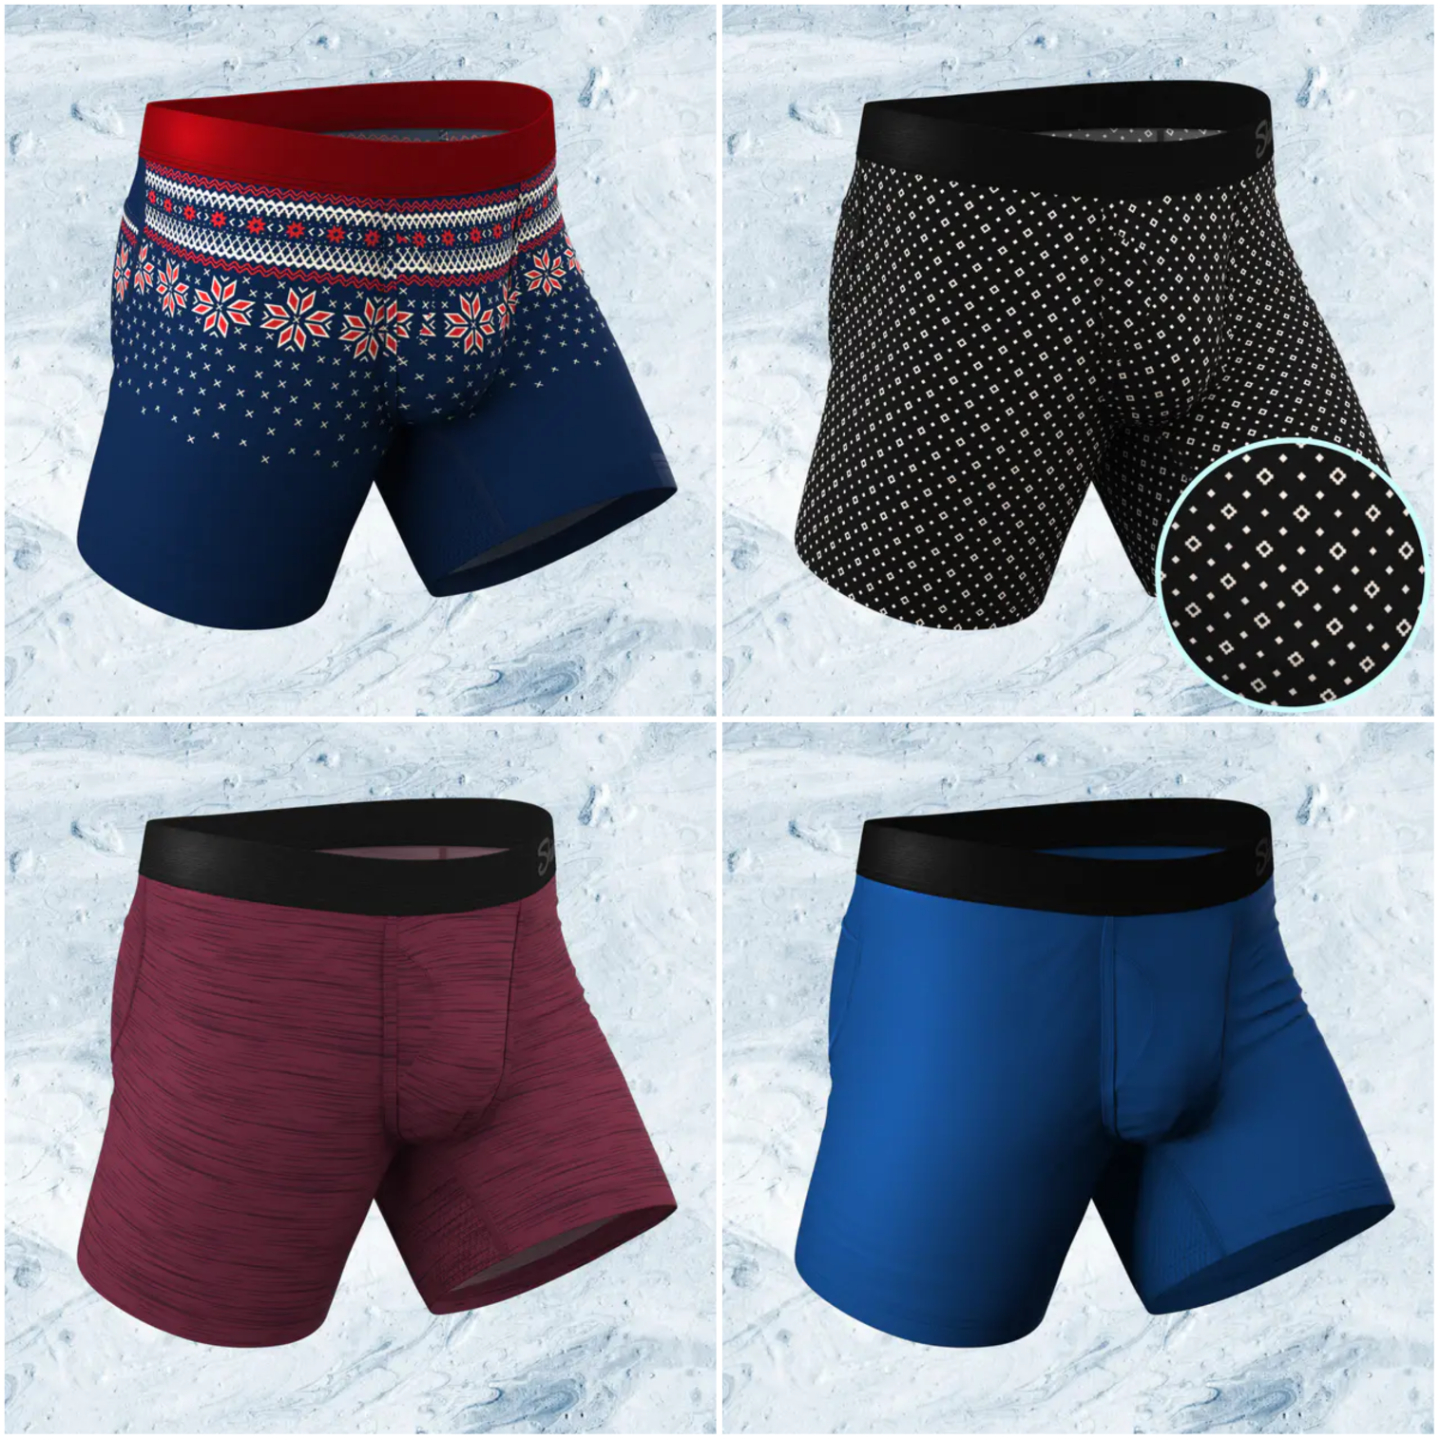 ENDS TODAY: Shinesty Underwear Deal: Buy Three Pairs, Get A Fourth Pair ...